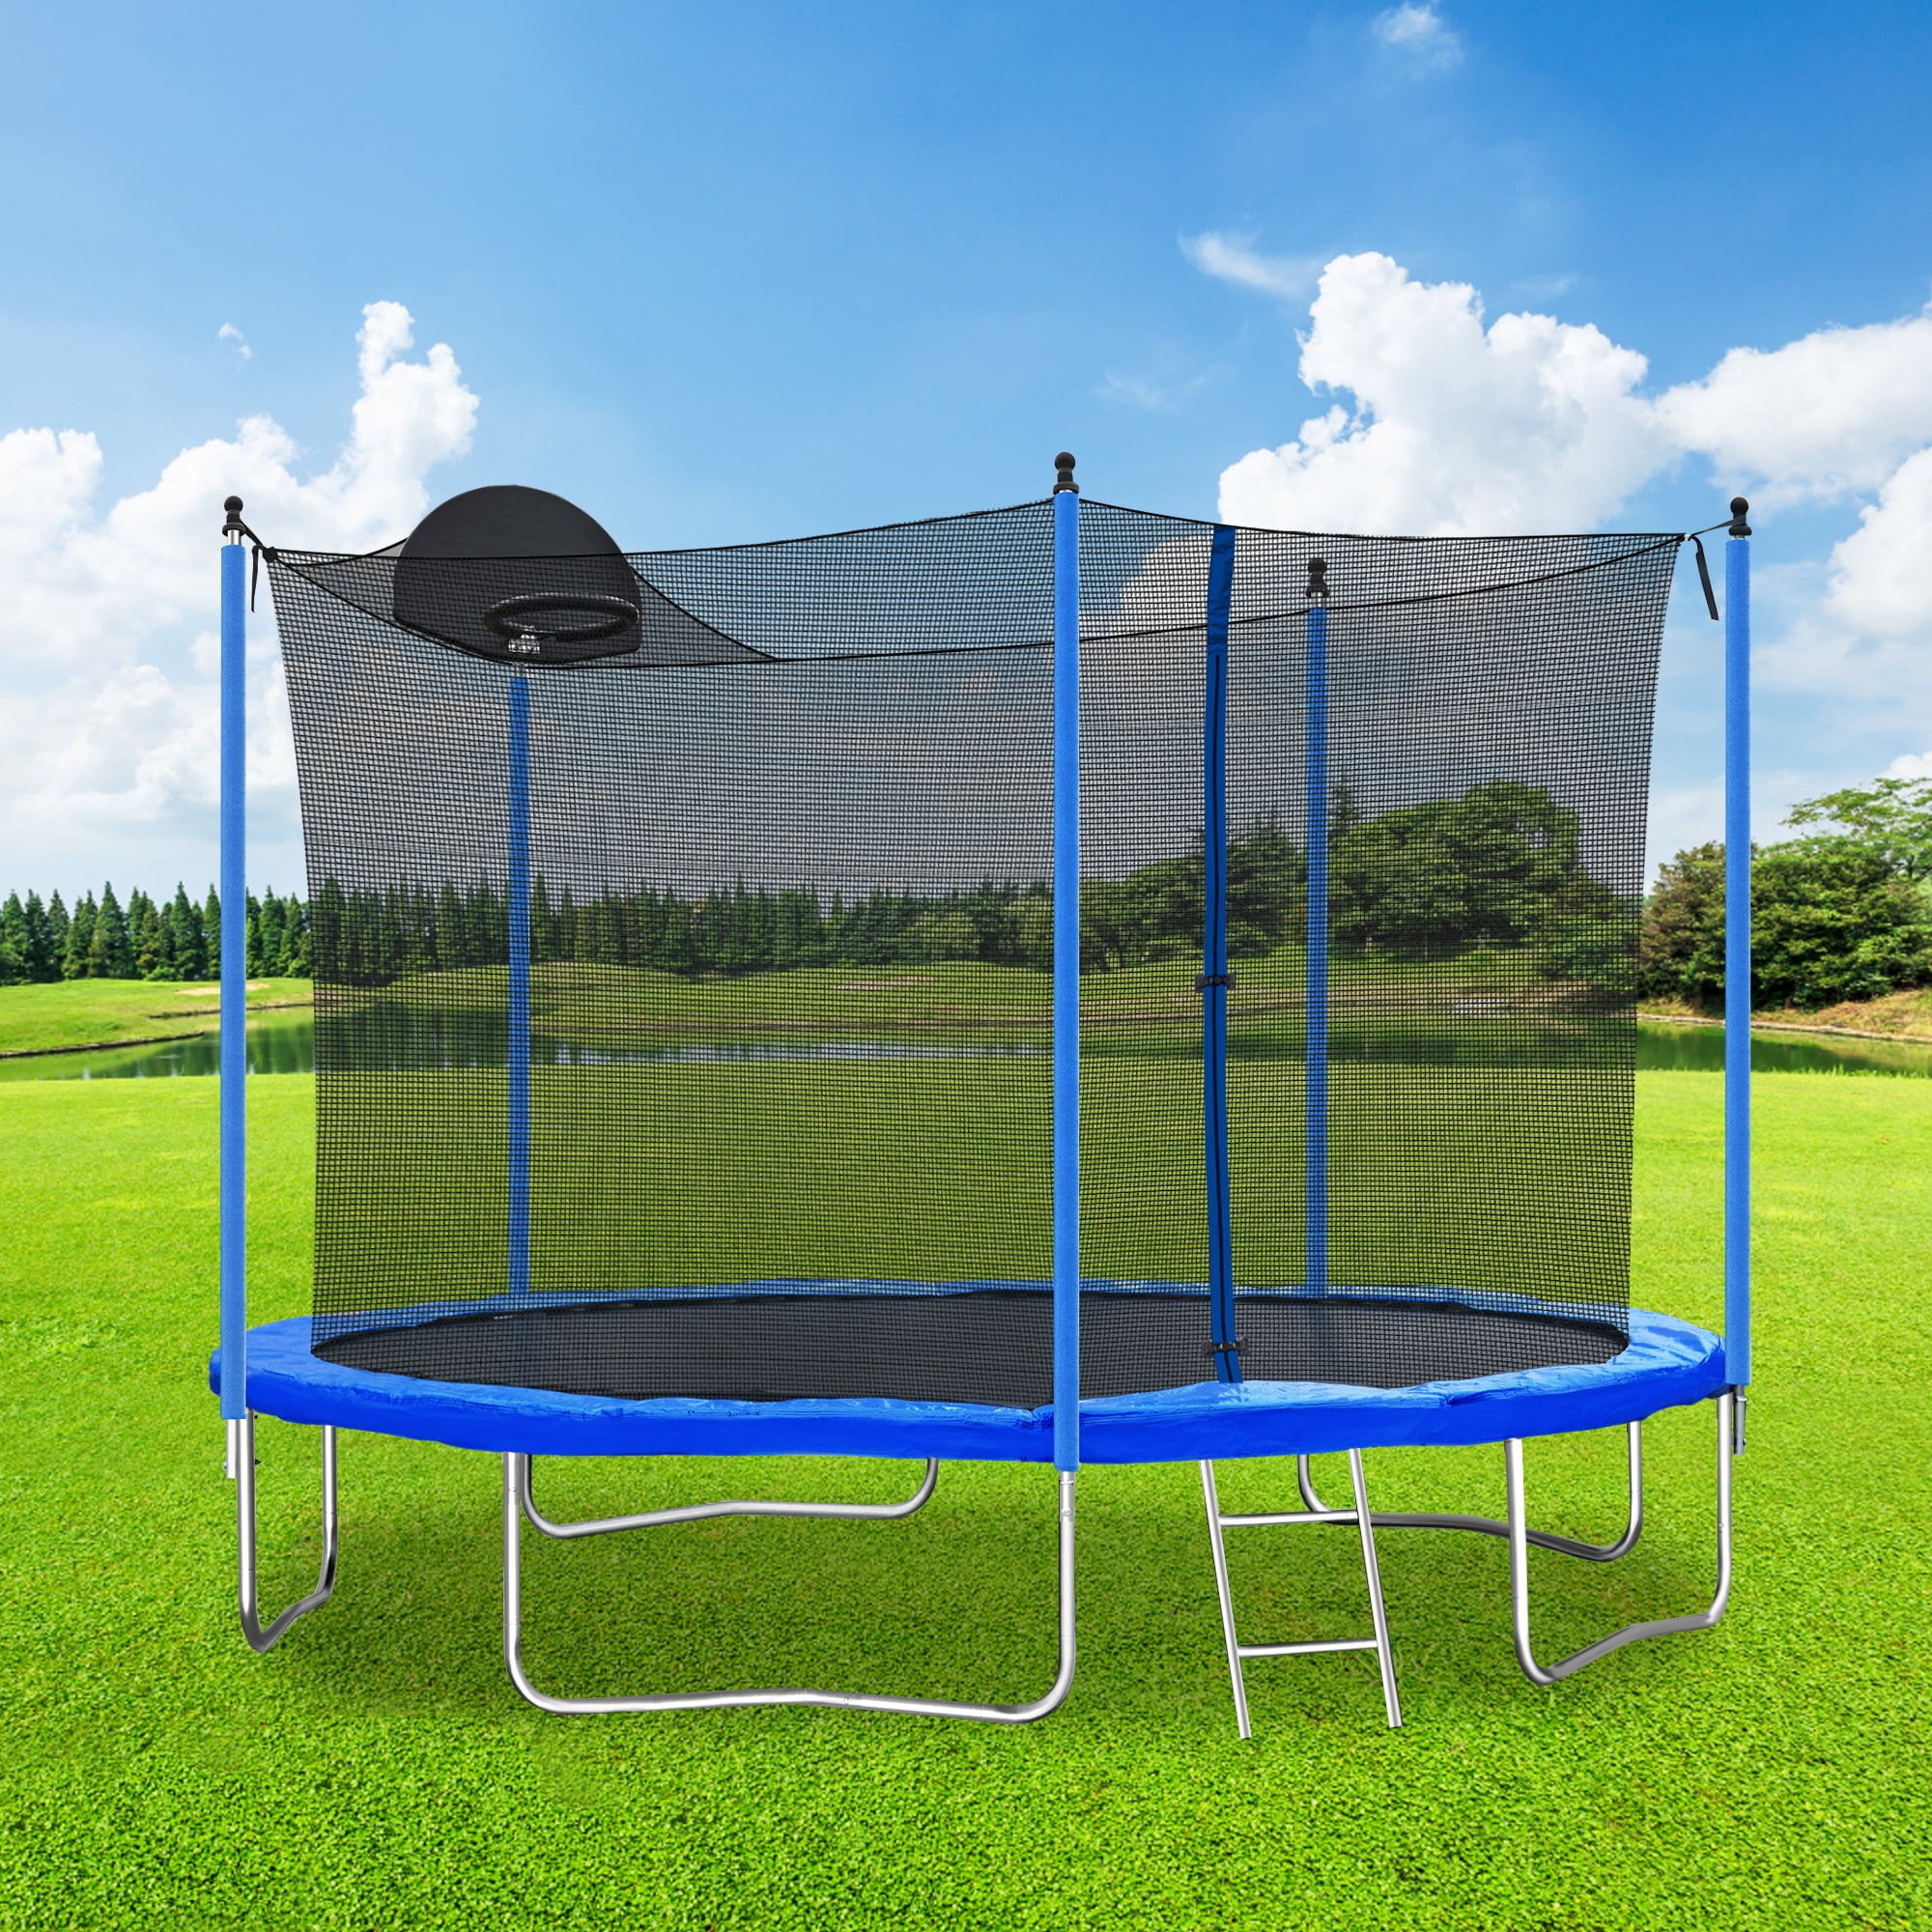 Sumdeal 12FT Kids Trampoline with Basketball Hoop and triangular ...